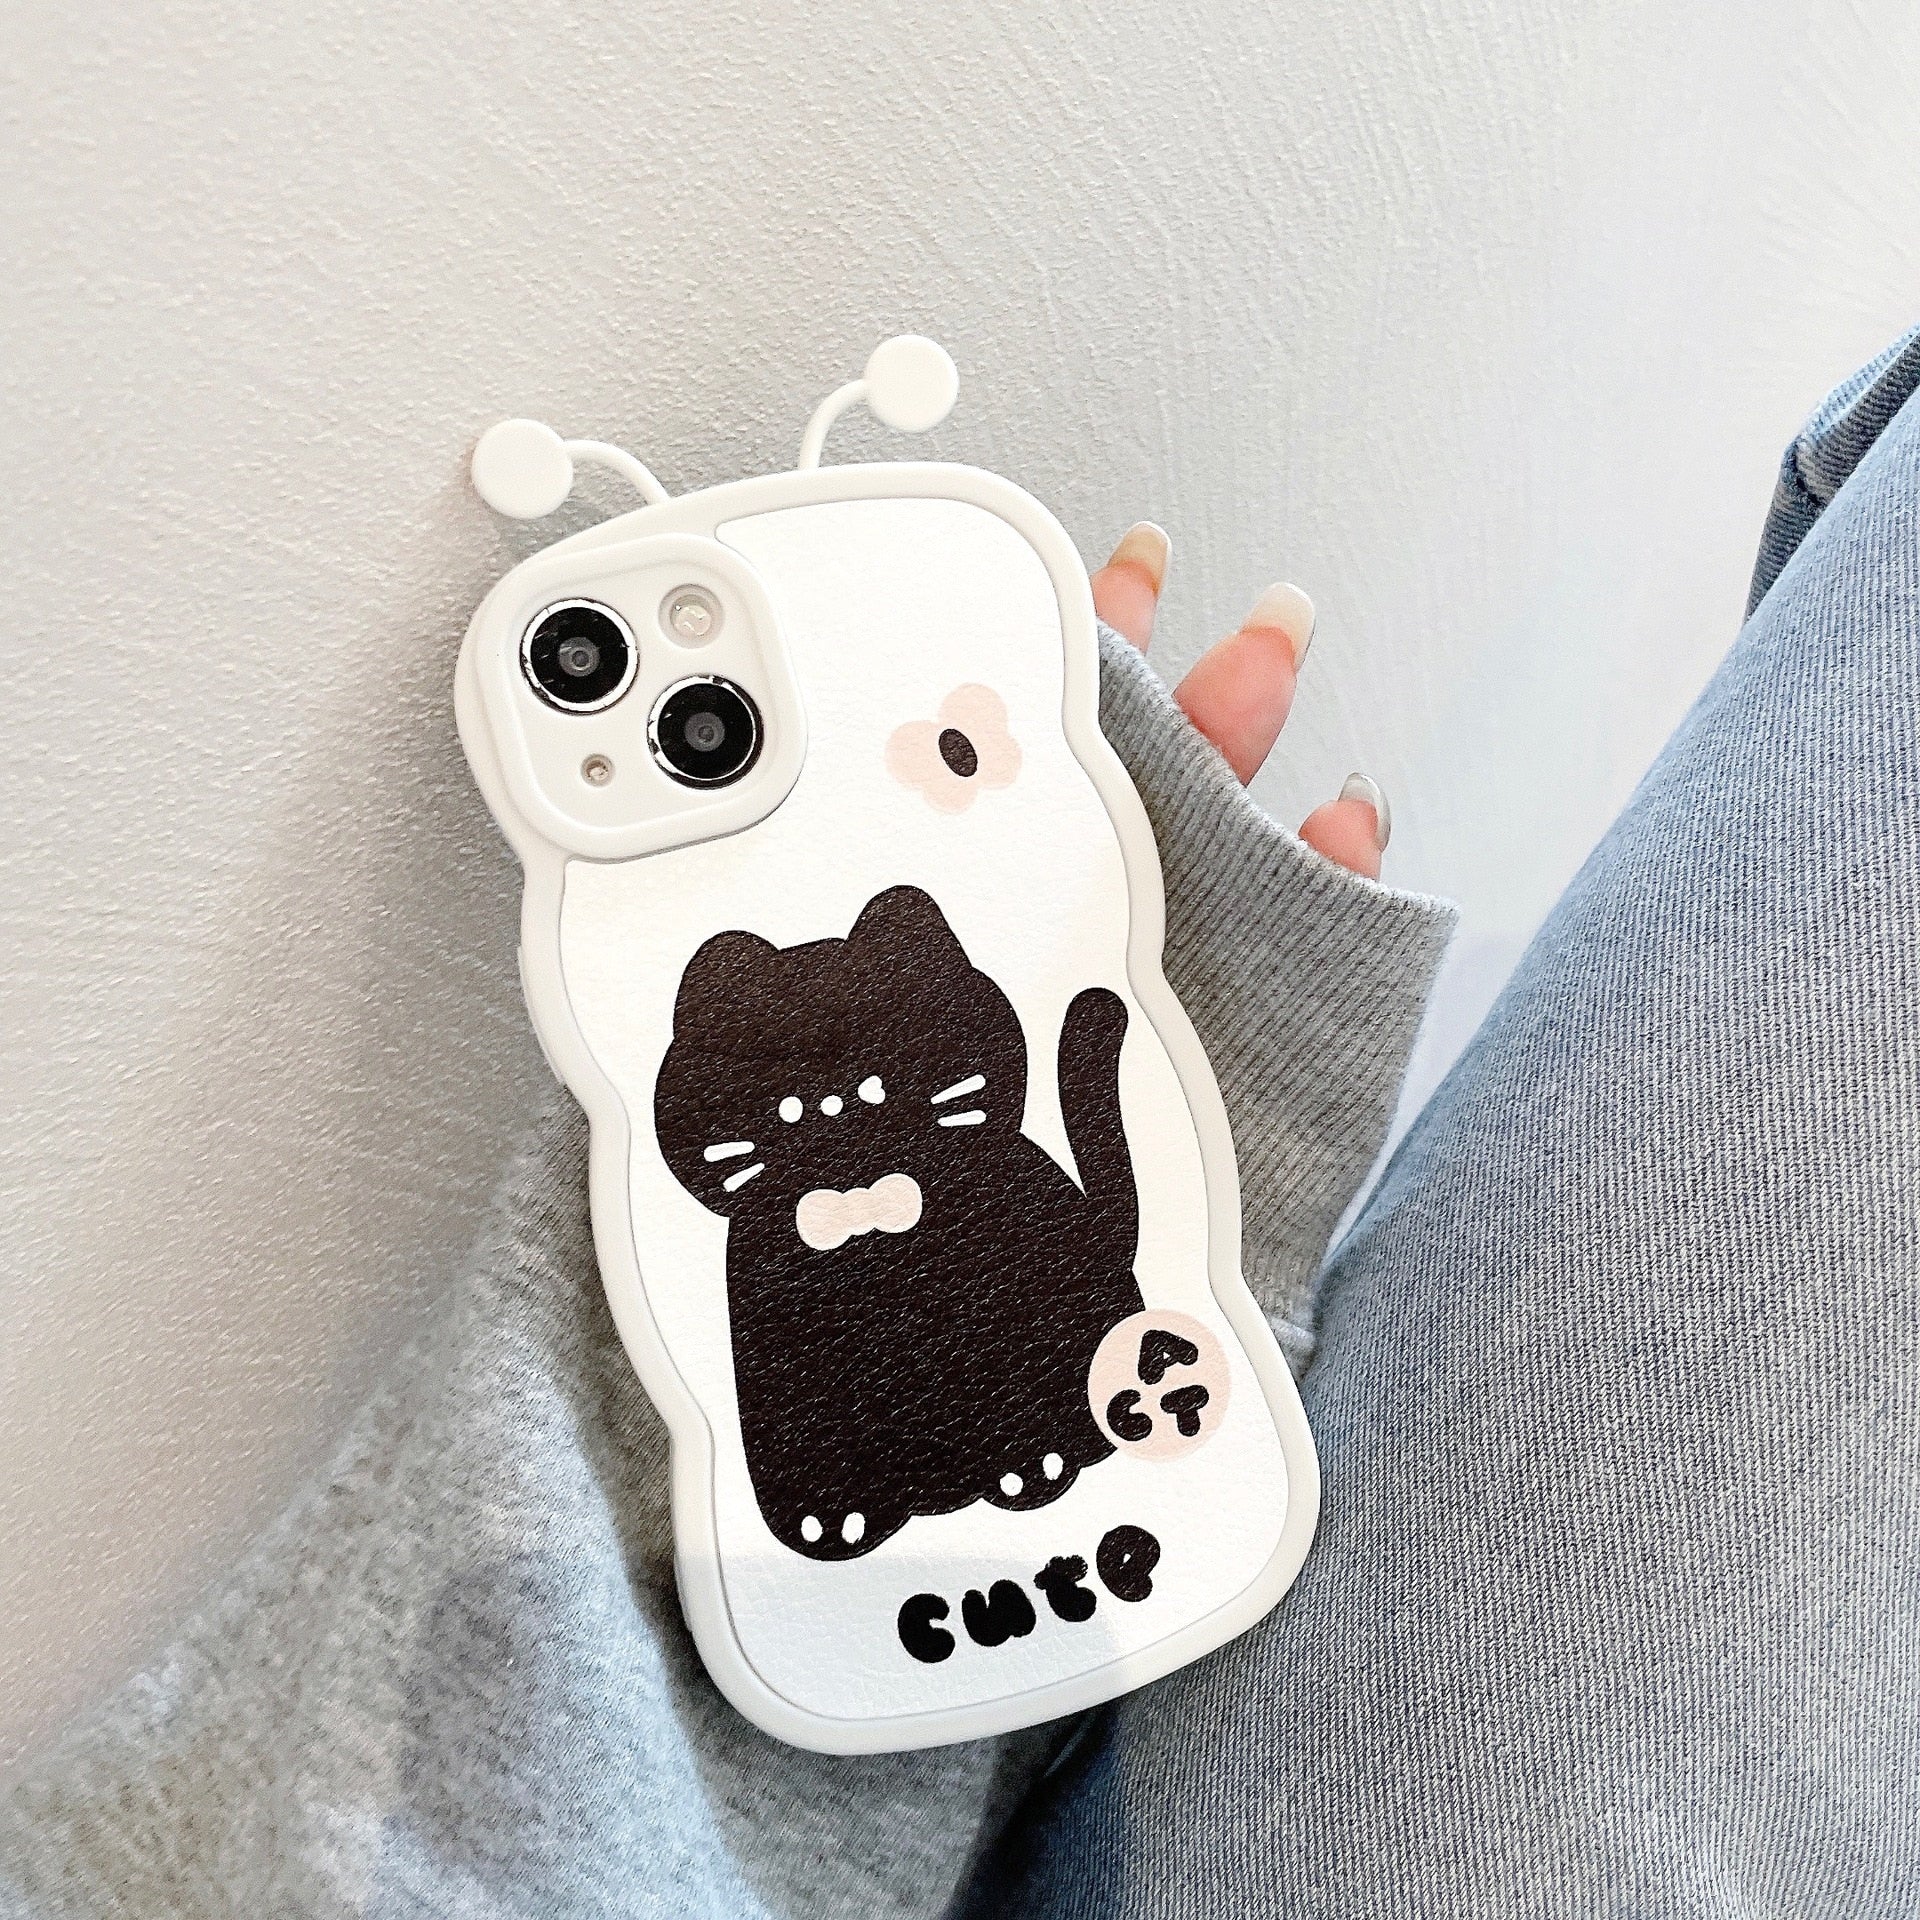 iPhone Butterfly Cat Phone Case - for iphone X / White - Cat